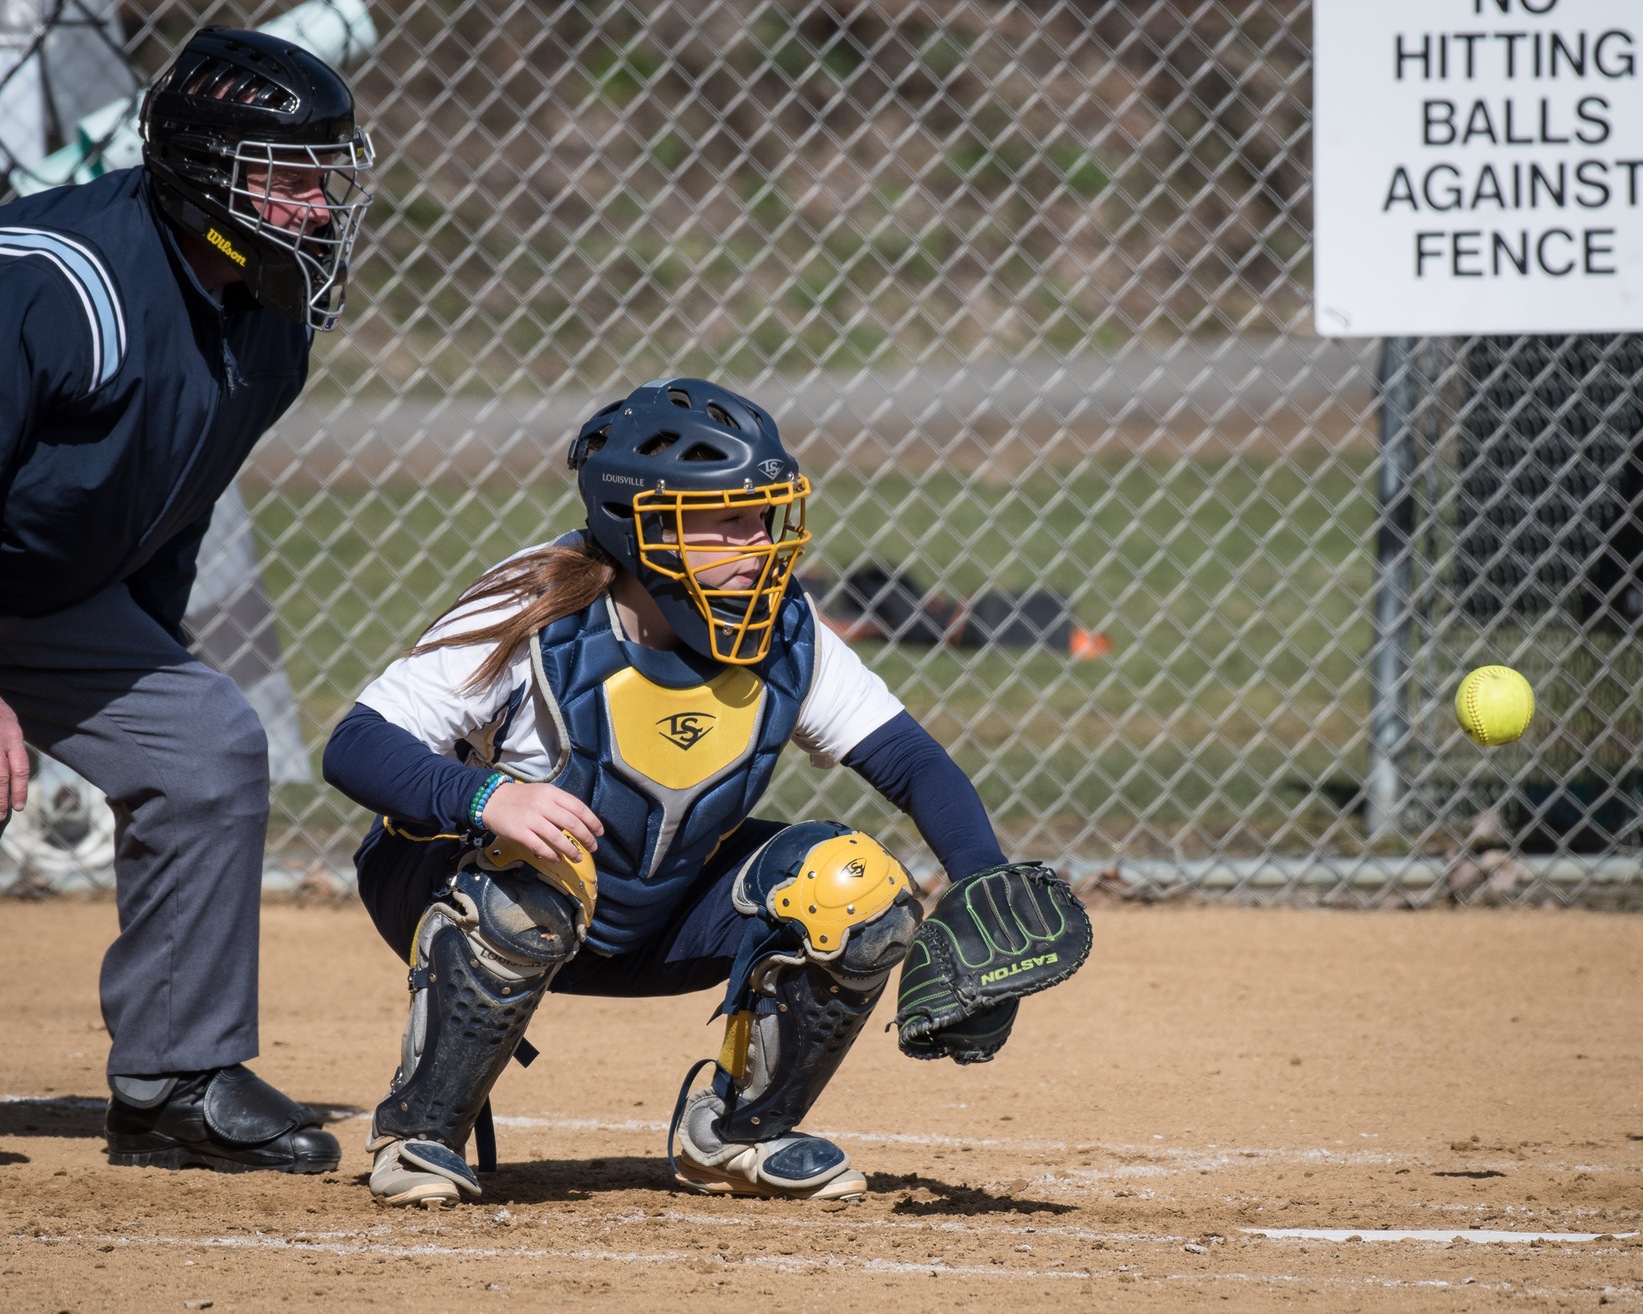 Softball season comes to a close with pair of setbacks at Salem State